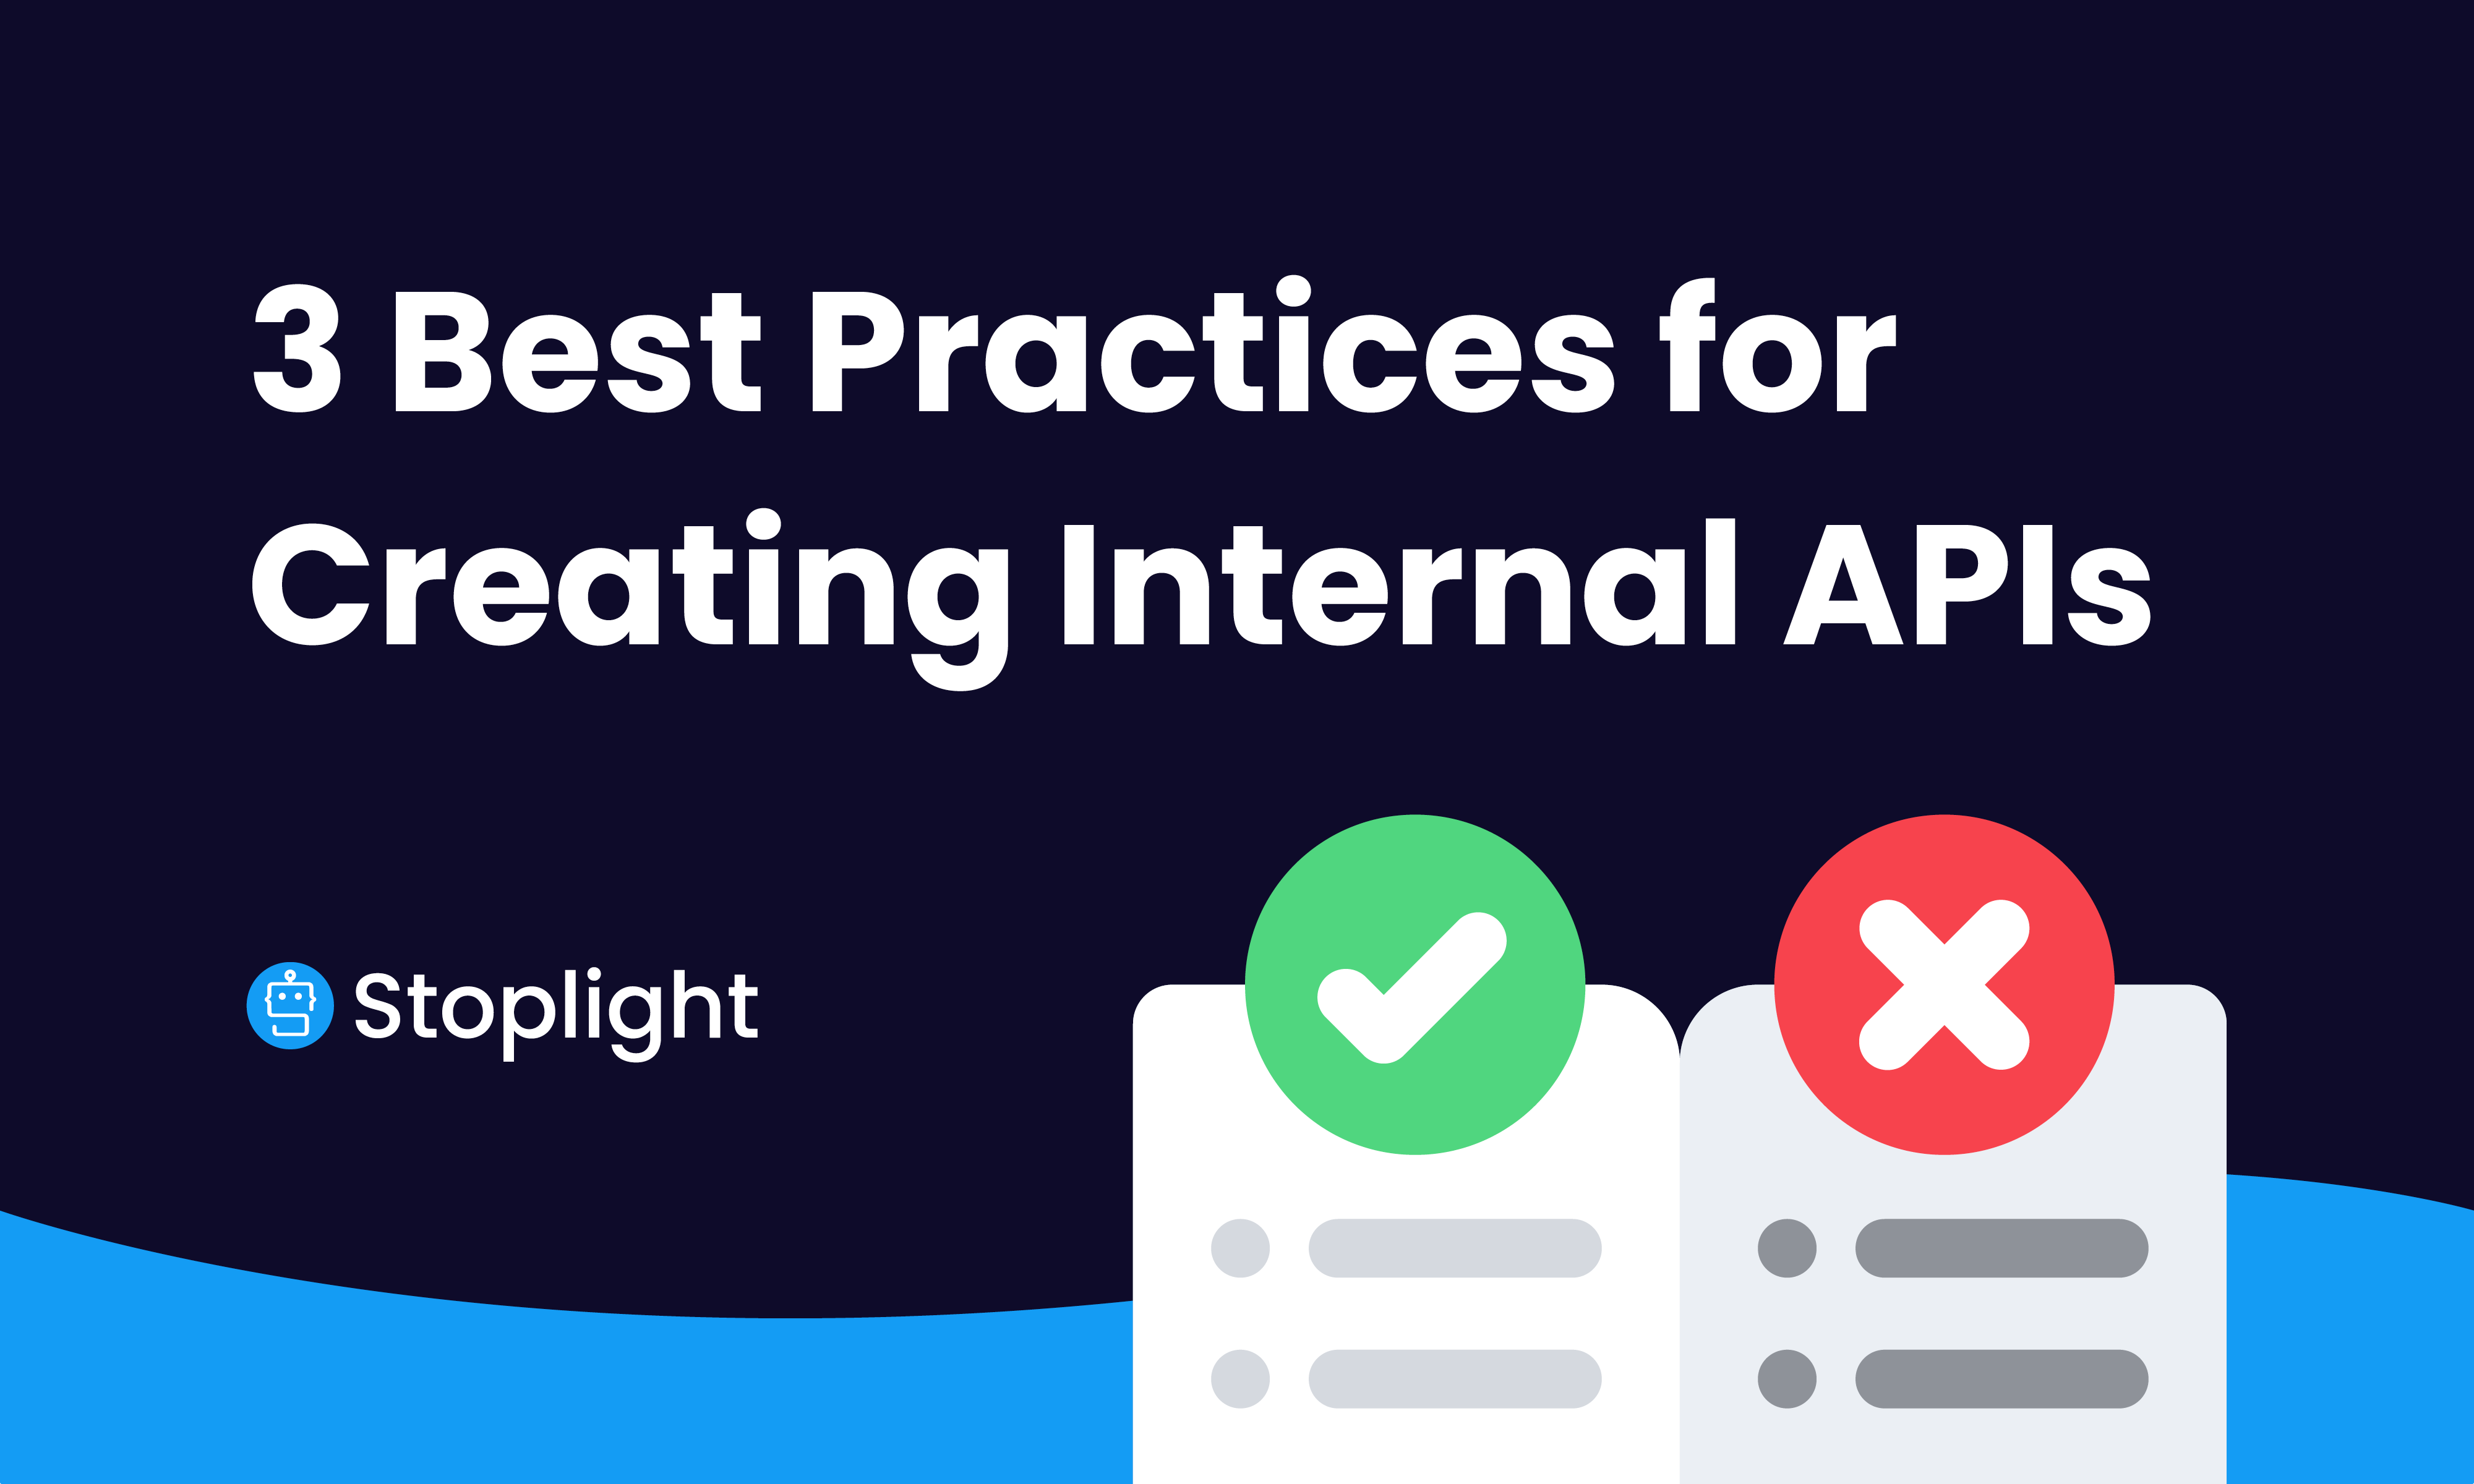 3 Best Practices for Creating Internal APIs